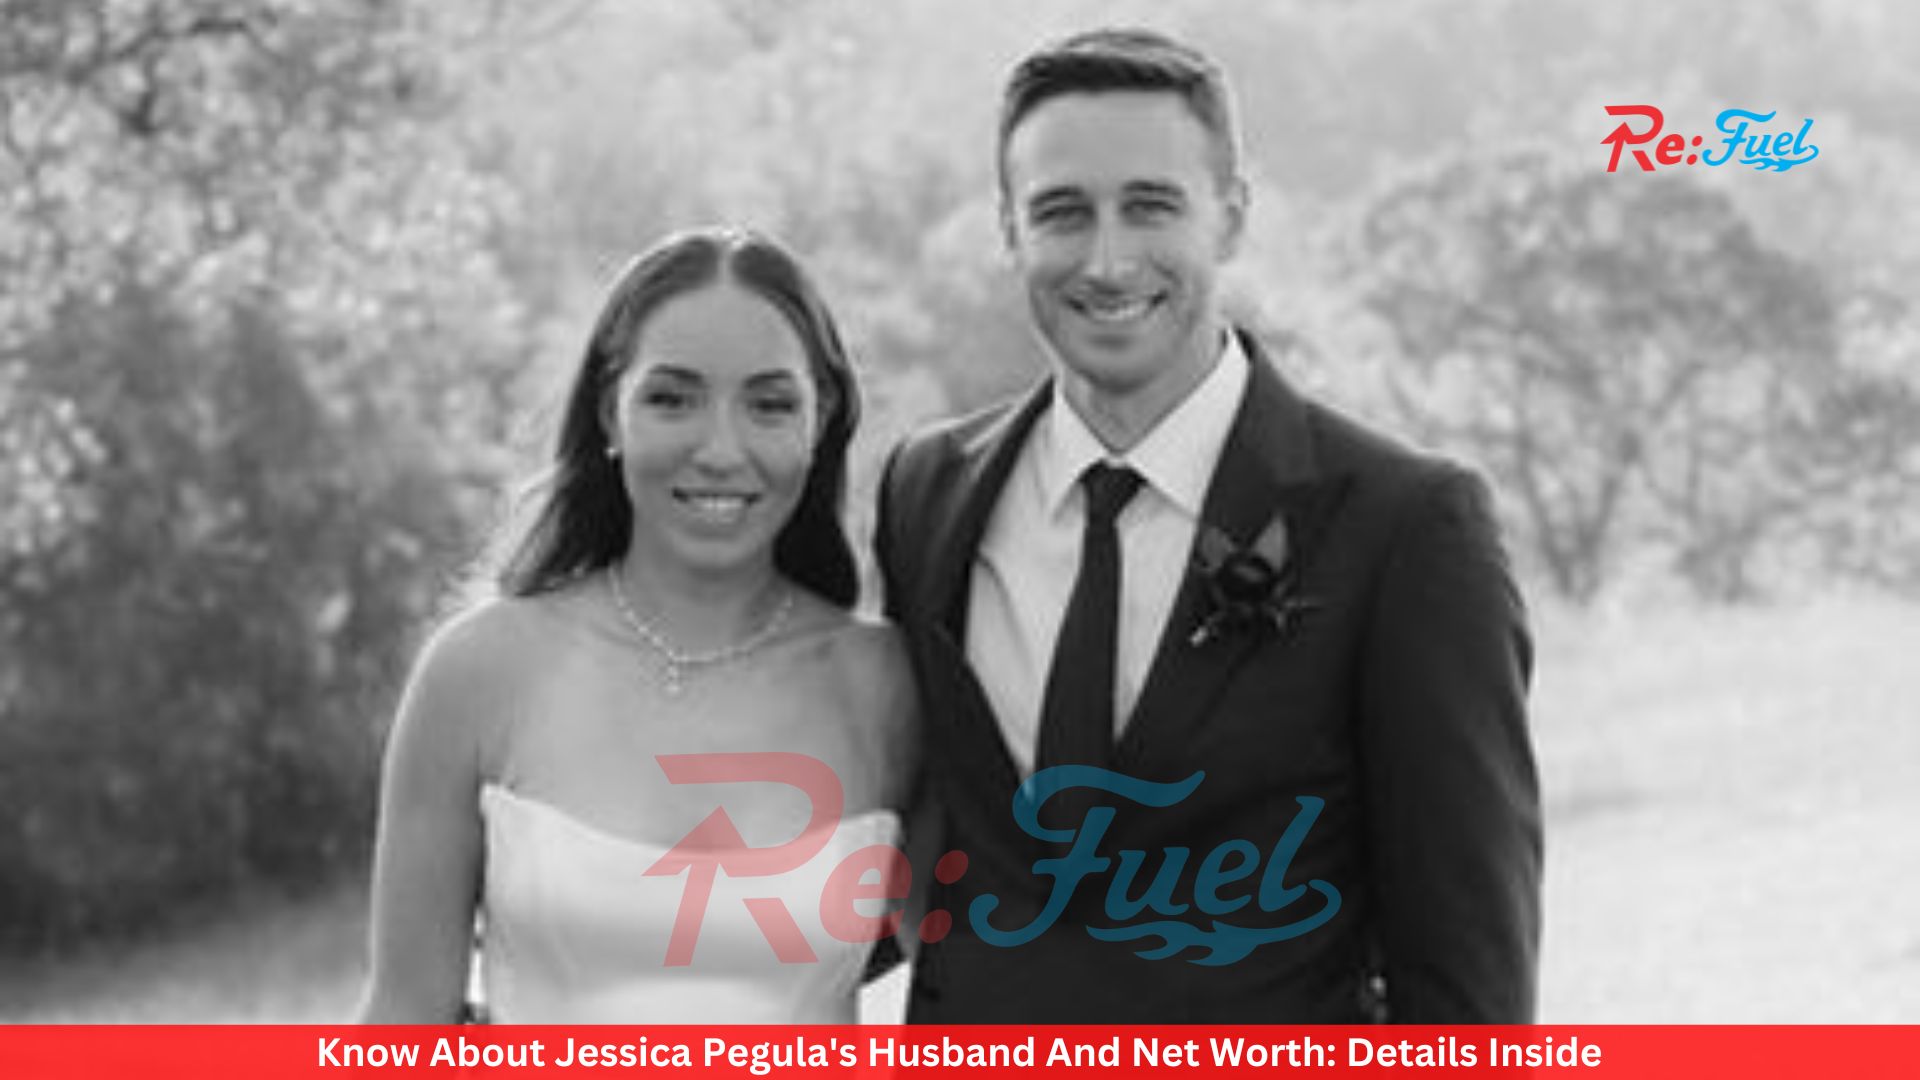 Know About Jessica Pegula's Husband And Net Worth: Details Inside